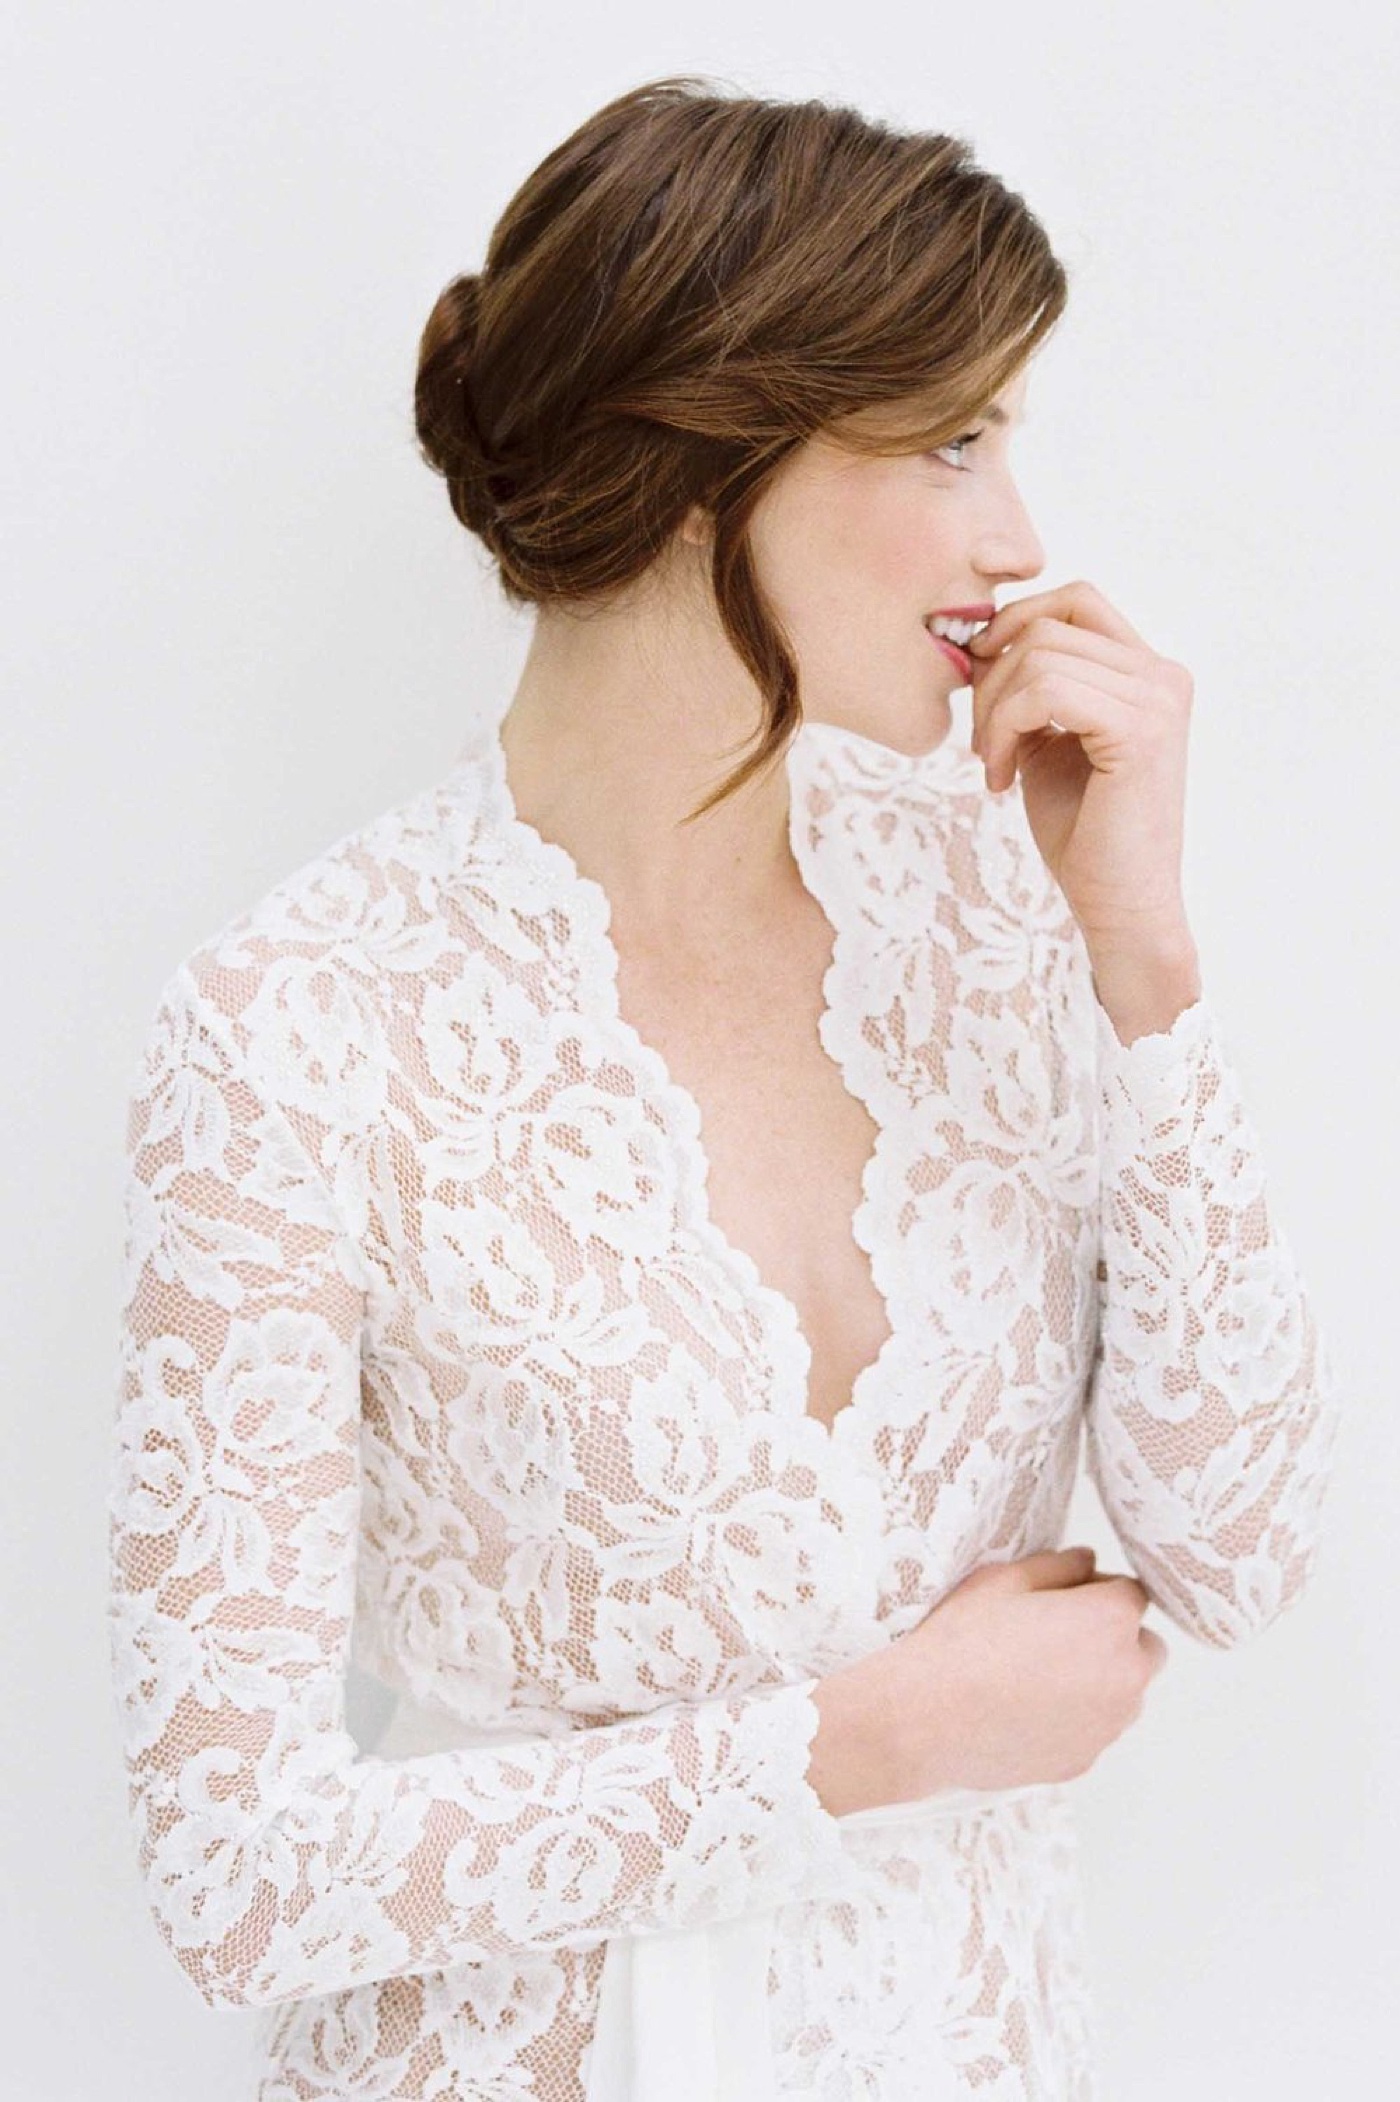 holiday-gift-guide-french-lace-robes-earrings-notebooks-jessica-haley-bridal-photo